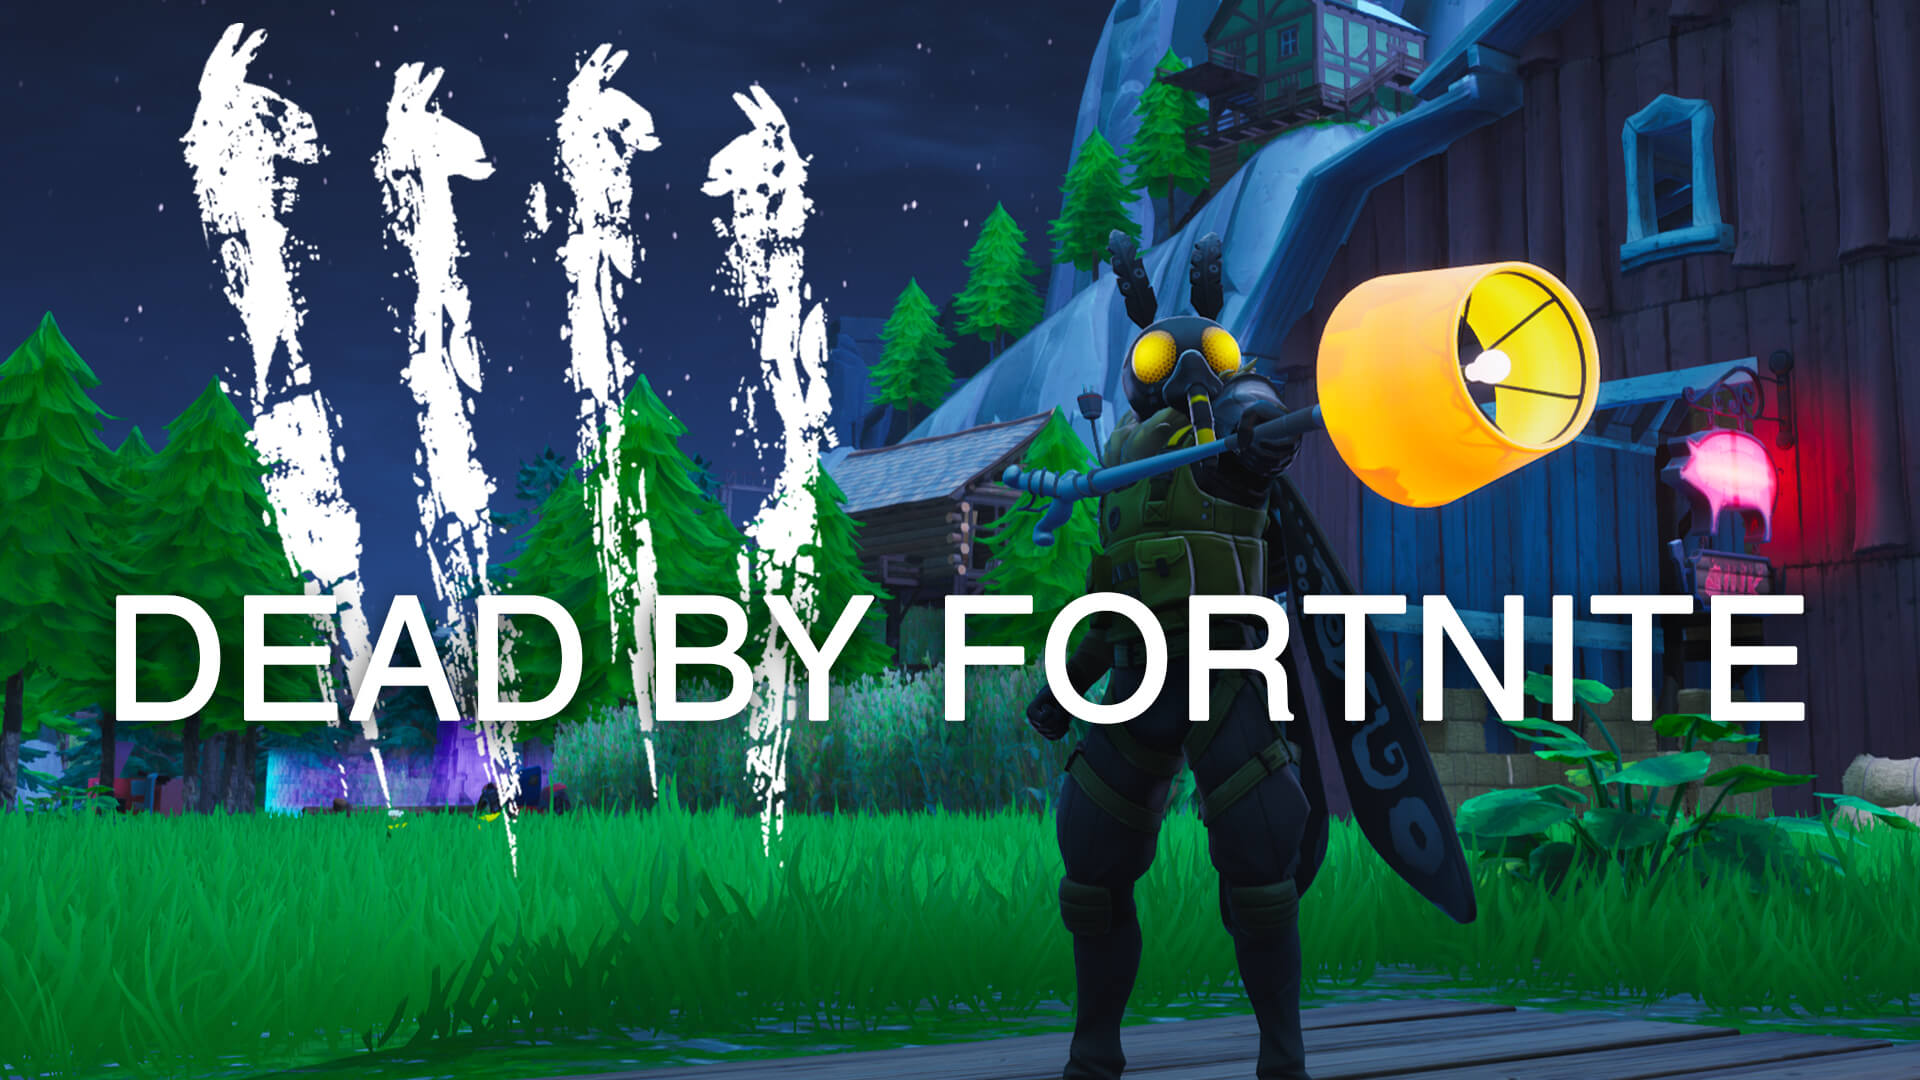 DEAD BY FORTNITE - FREAKY FOREST